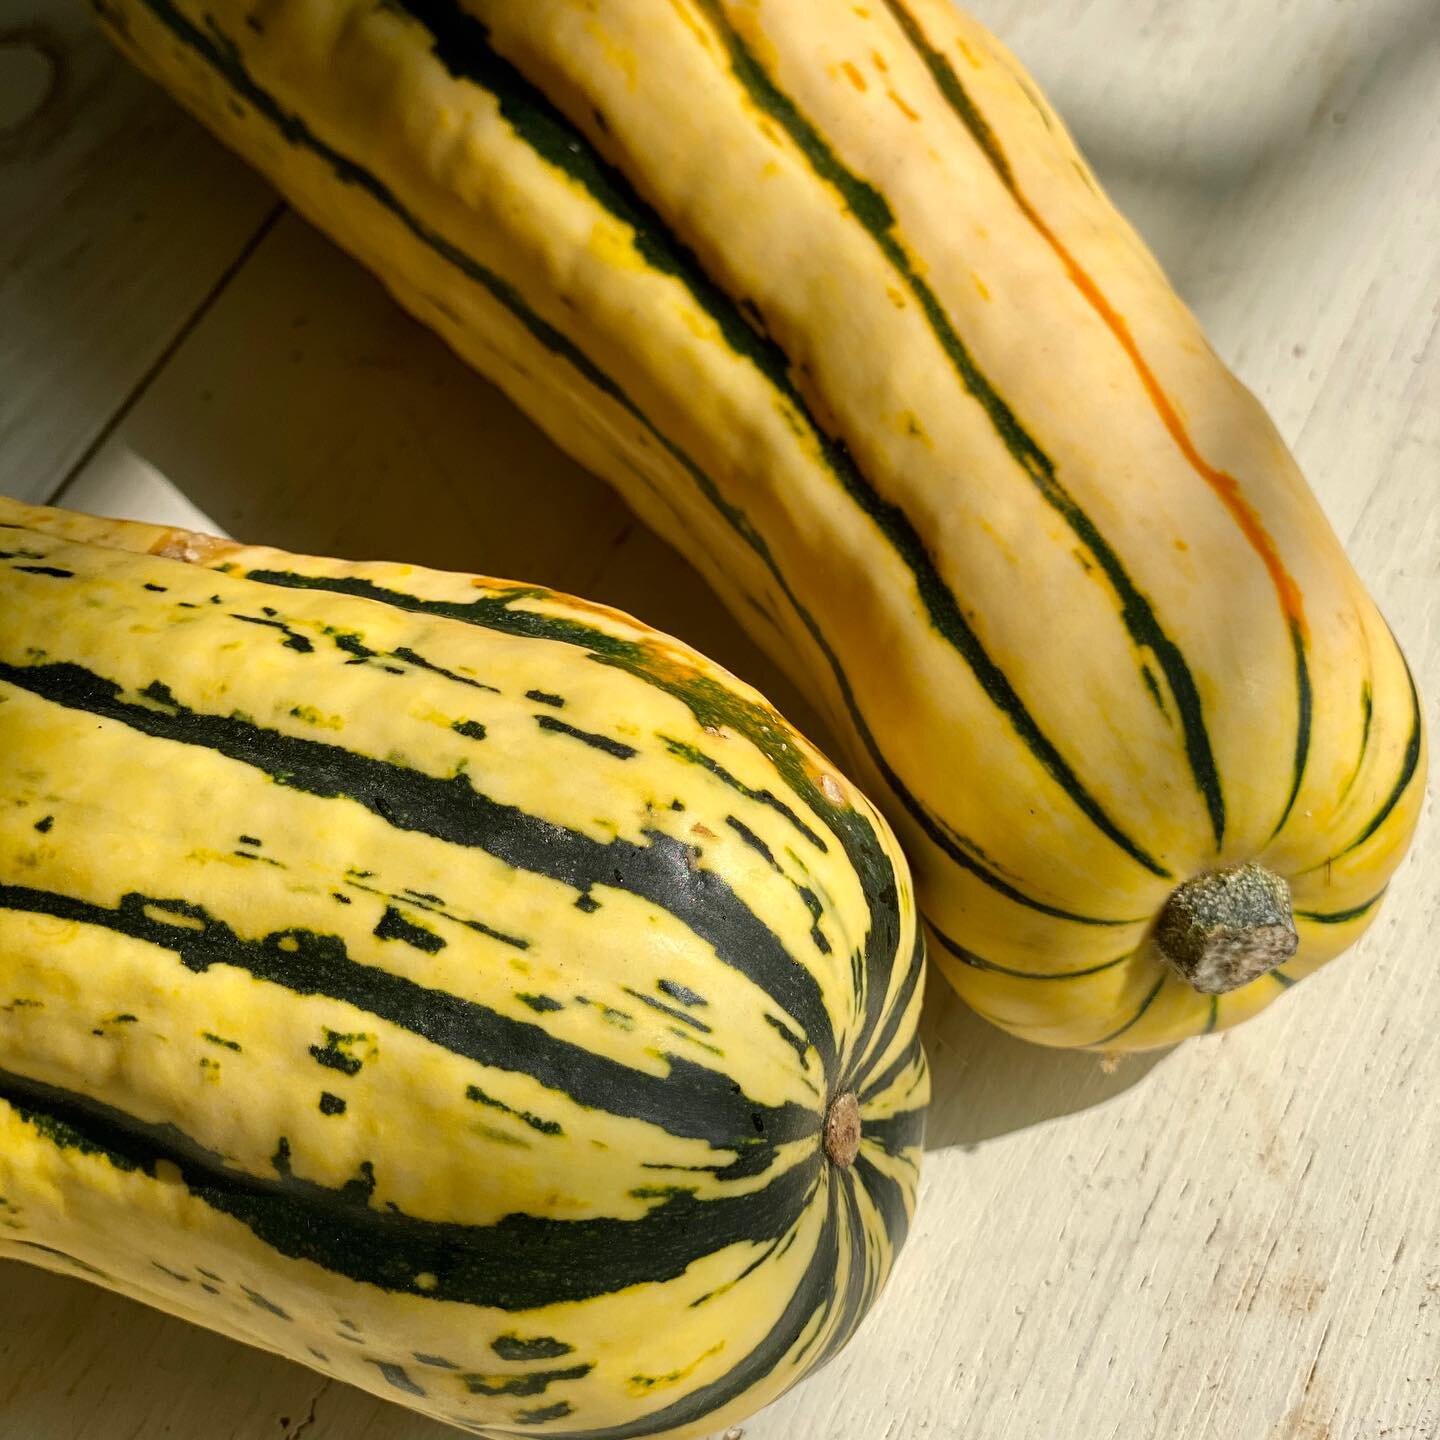 I absolutely love Delicata squash!  My latest column for @northernhglmagazine features a sauté of Delicata from @farminitllc with a bit of bacon from @asgaardfarm.  Be sure to check it out online or pickup a copy at a store near you. #wintersquash #